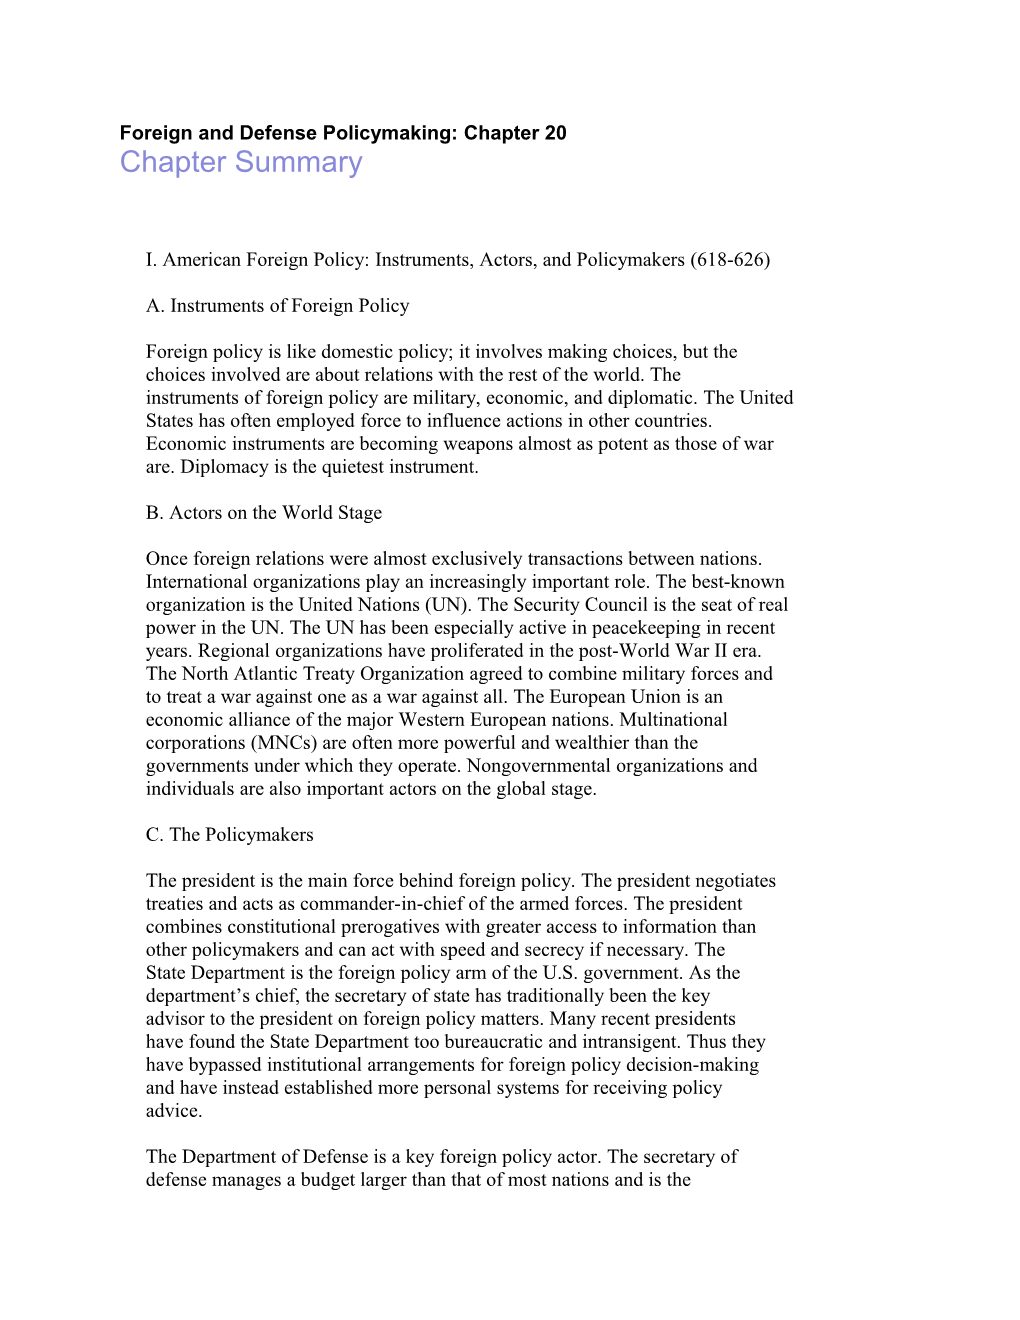 Foreign and Defense Policymaking: Chapter 20Chapter Summary